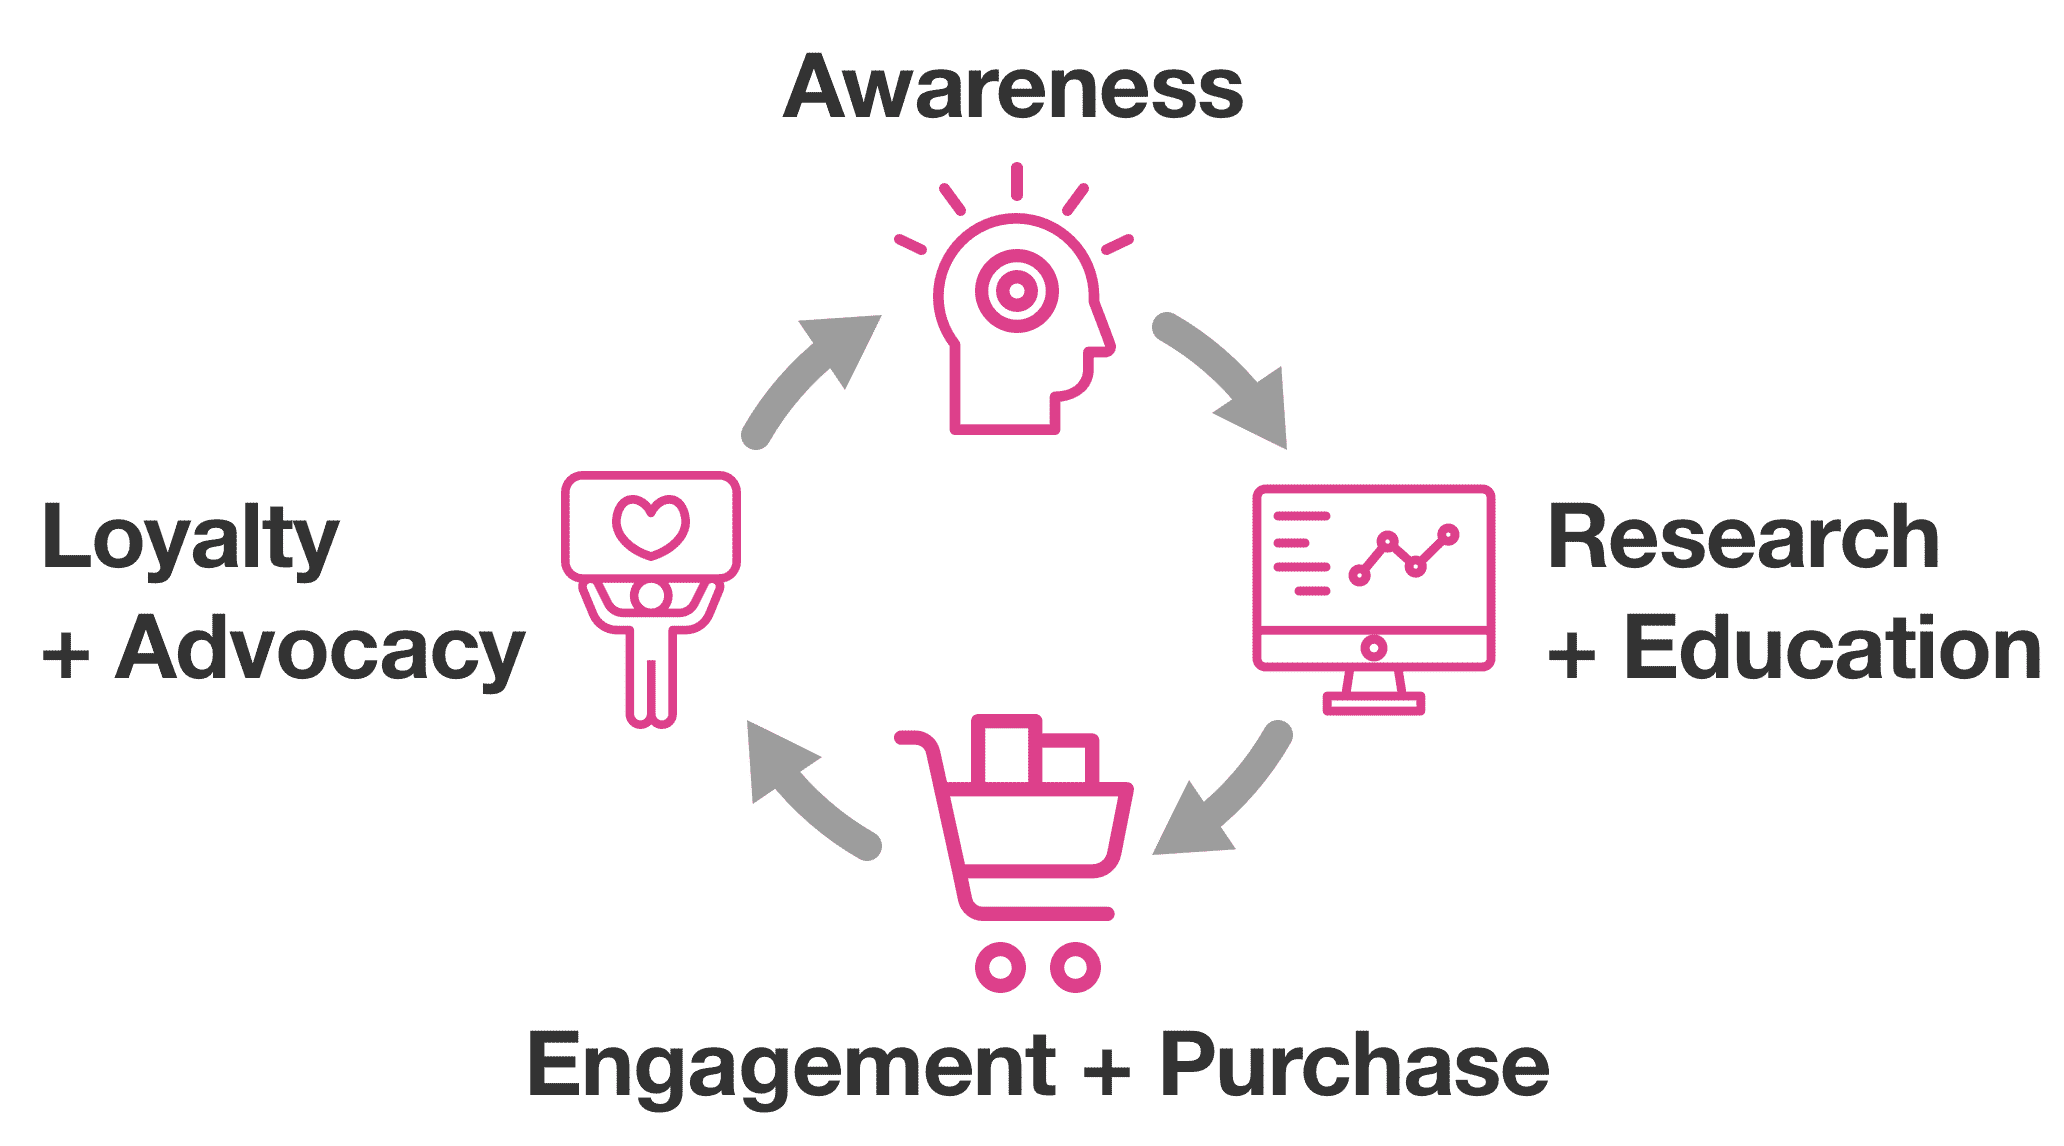 The Awareness to Advocacy Cycle visualizes how the Digital Amplification Agency team aligns media activity and investment to the customer journey. There are four elements that move in a clockwise circular manner from Awareness to Research + Education, to Engagement + Purchase, lastly to Loyalty Advocacy.